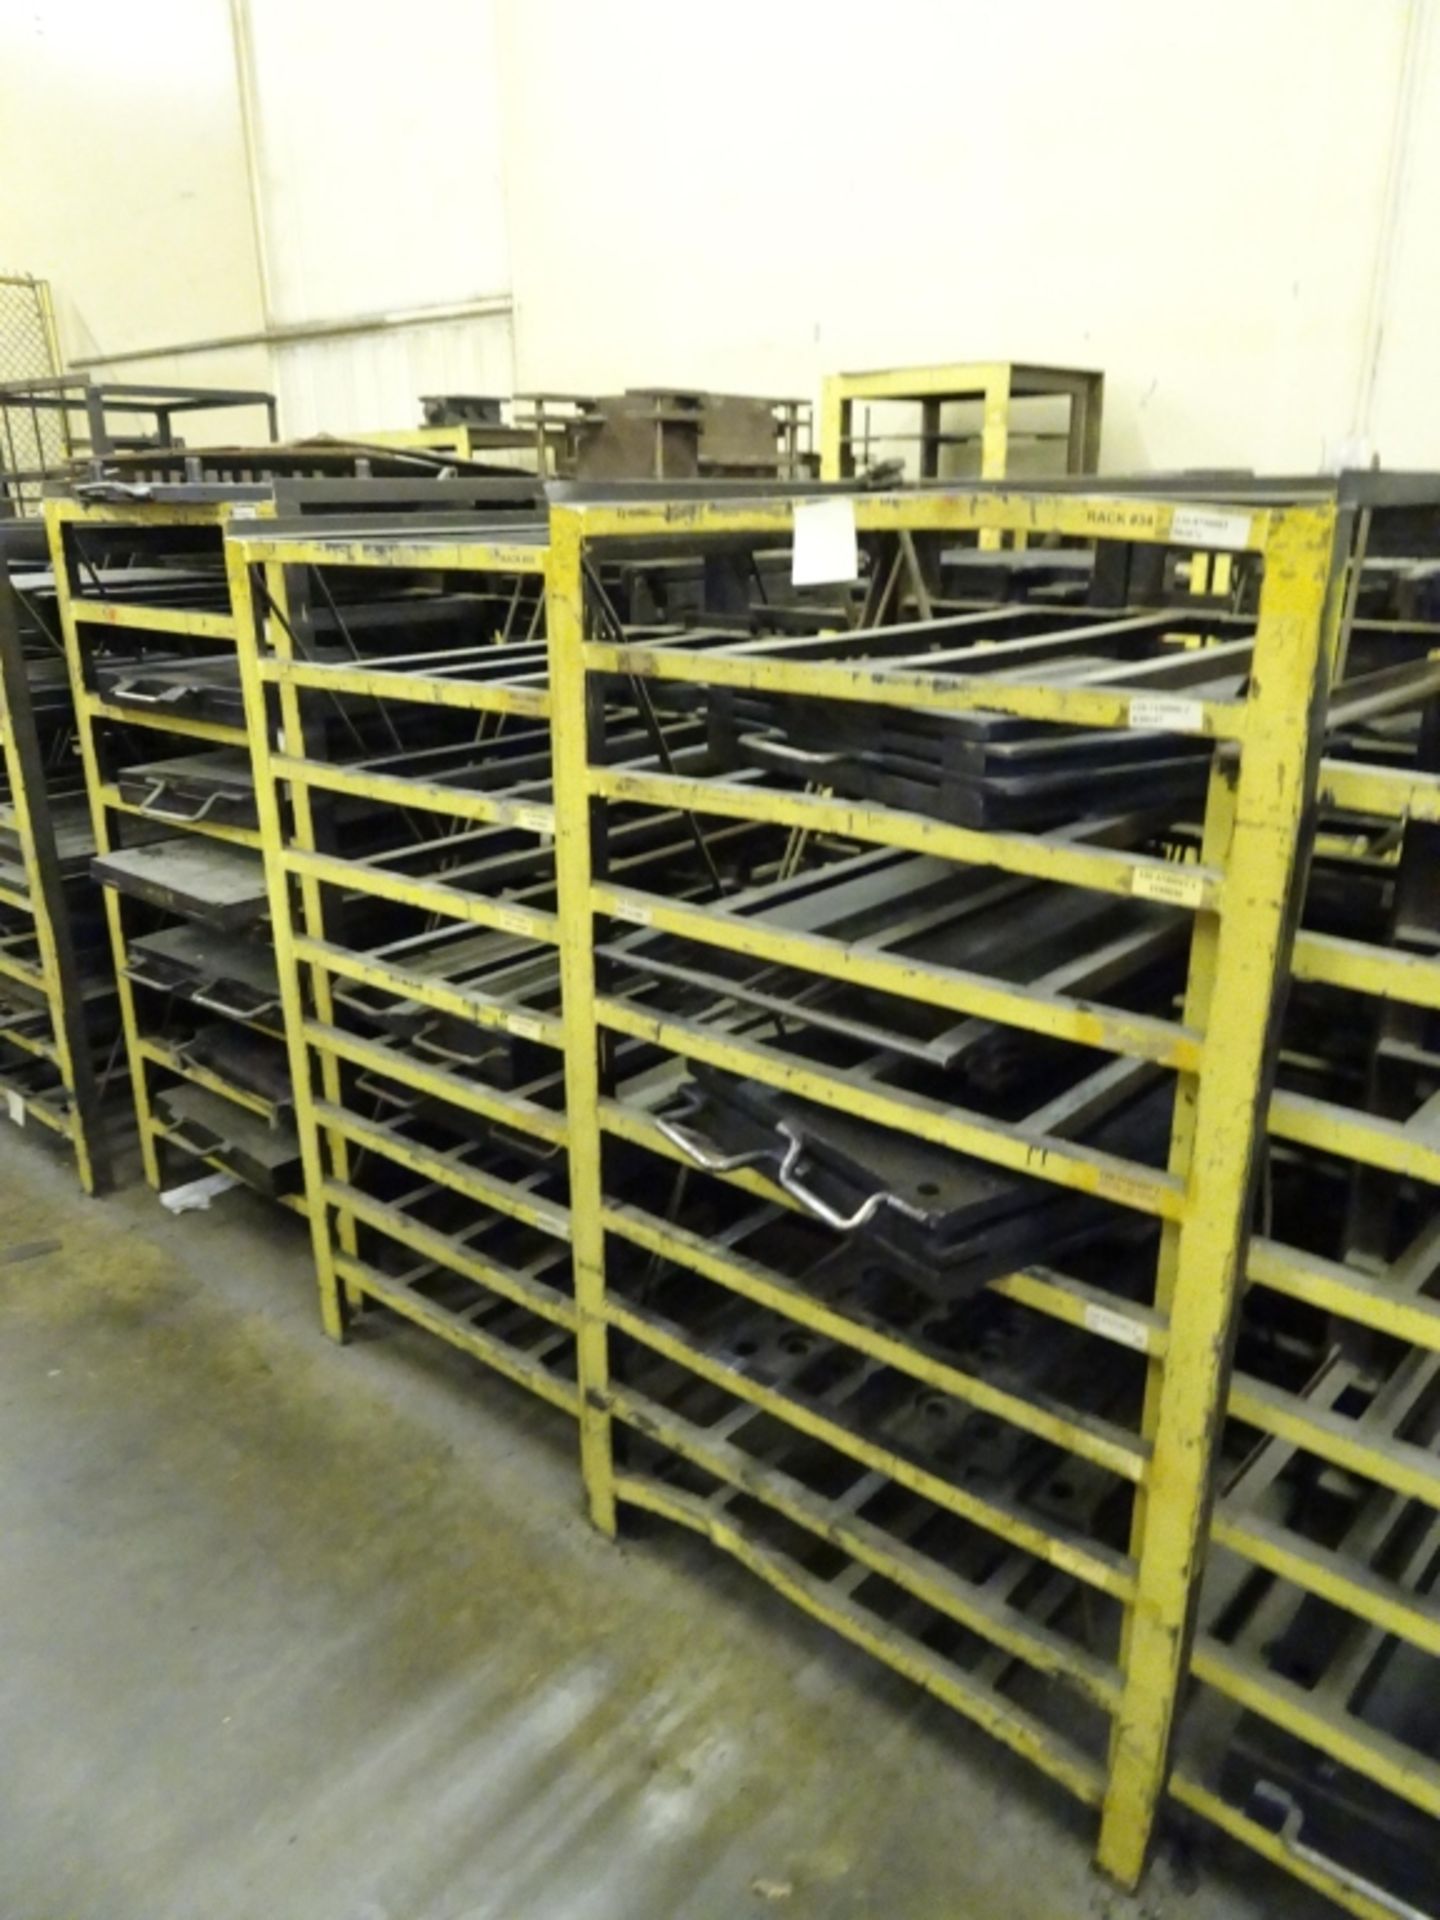 (13) Various Sized Heavy Duty Steel Mold Racks With No Contents - Image 4 of 6